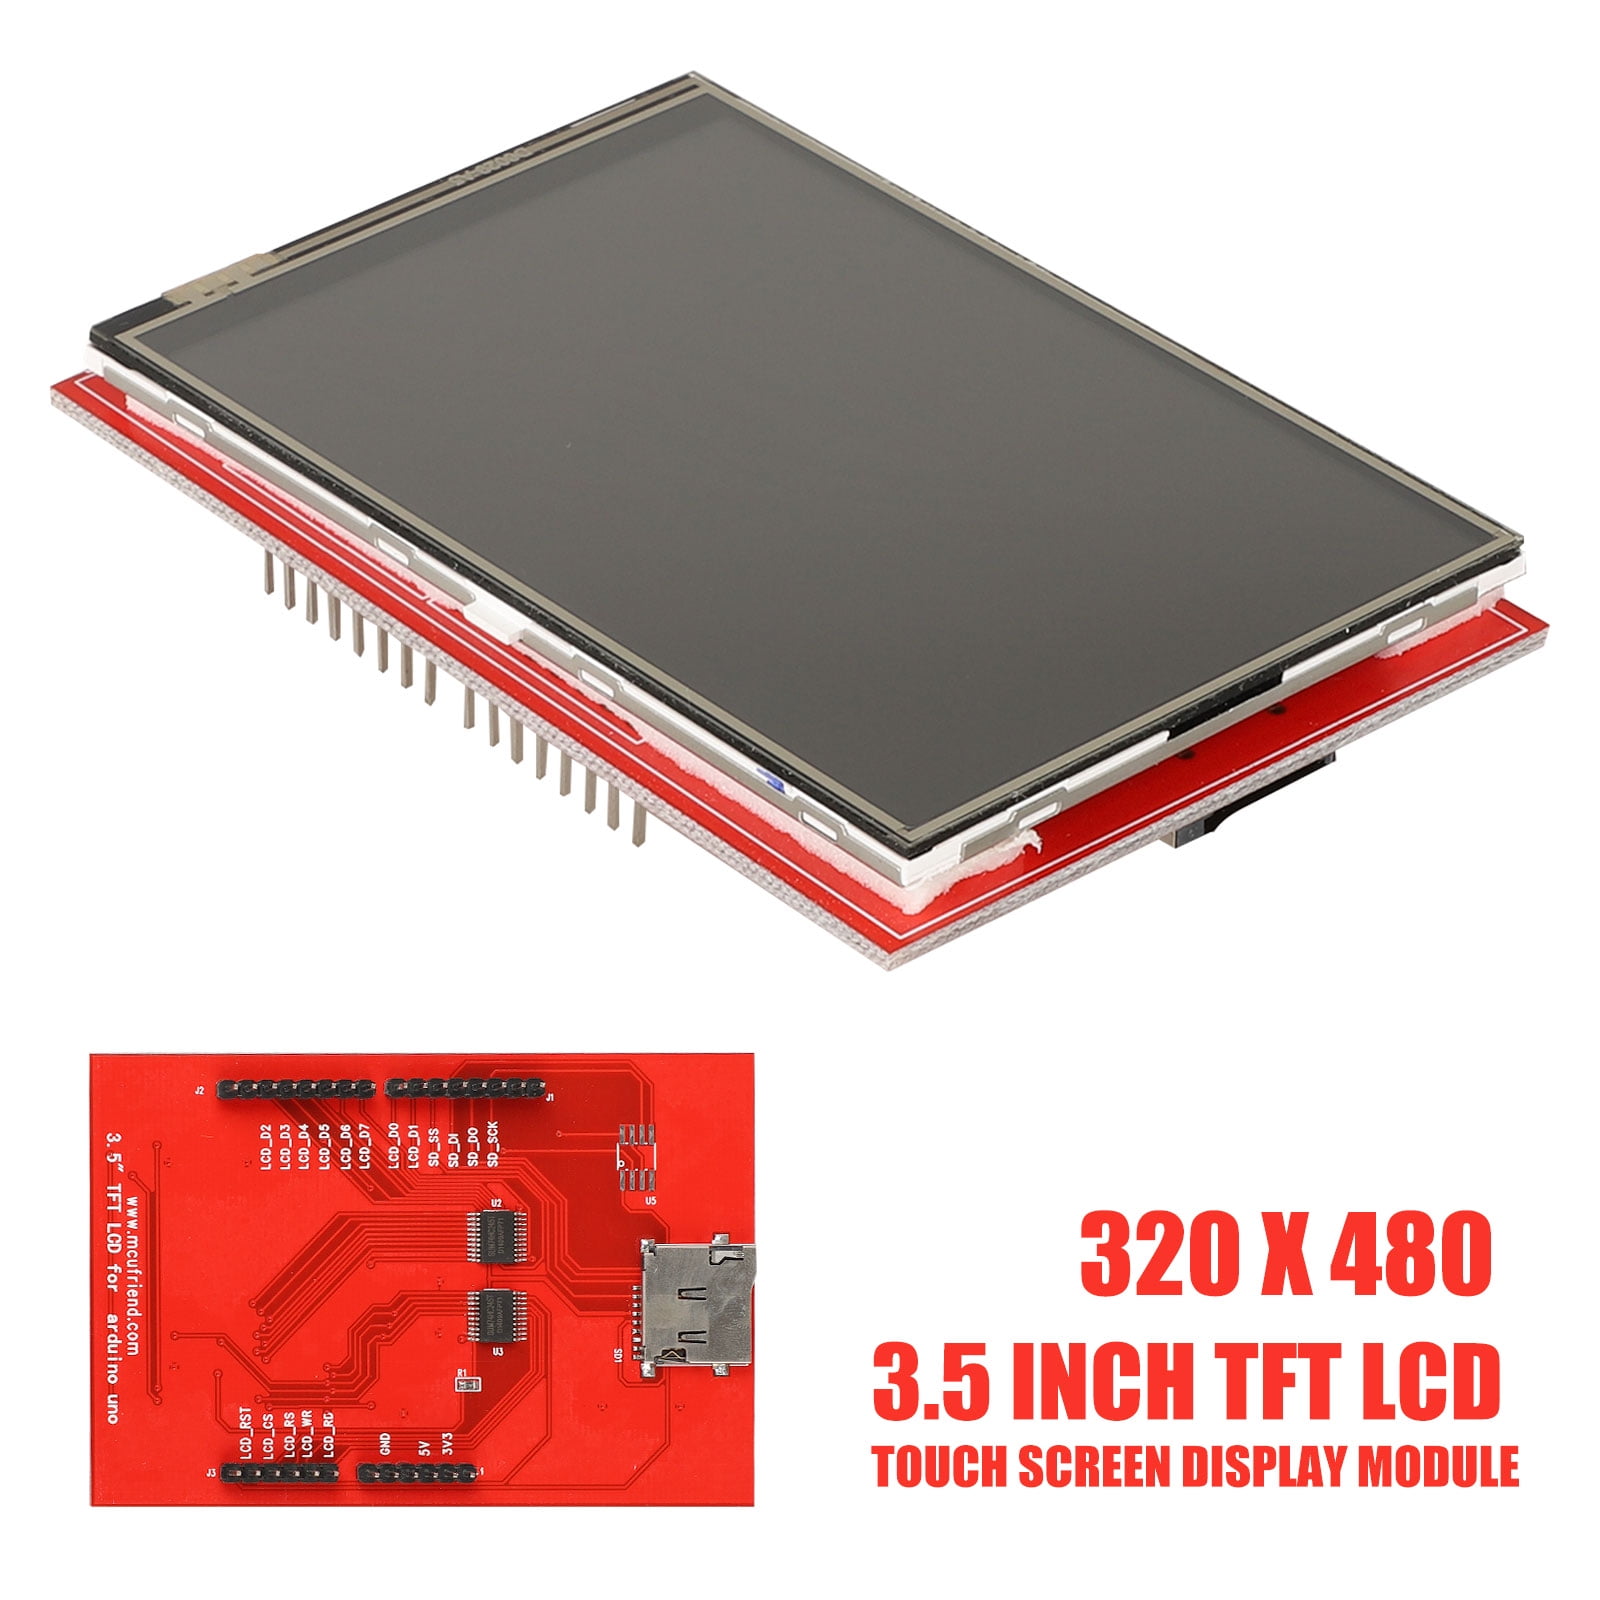 Red 3.5" inch TFT LCD Touch Screen Module 480X320 for Arduino Mega2560